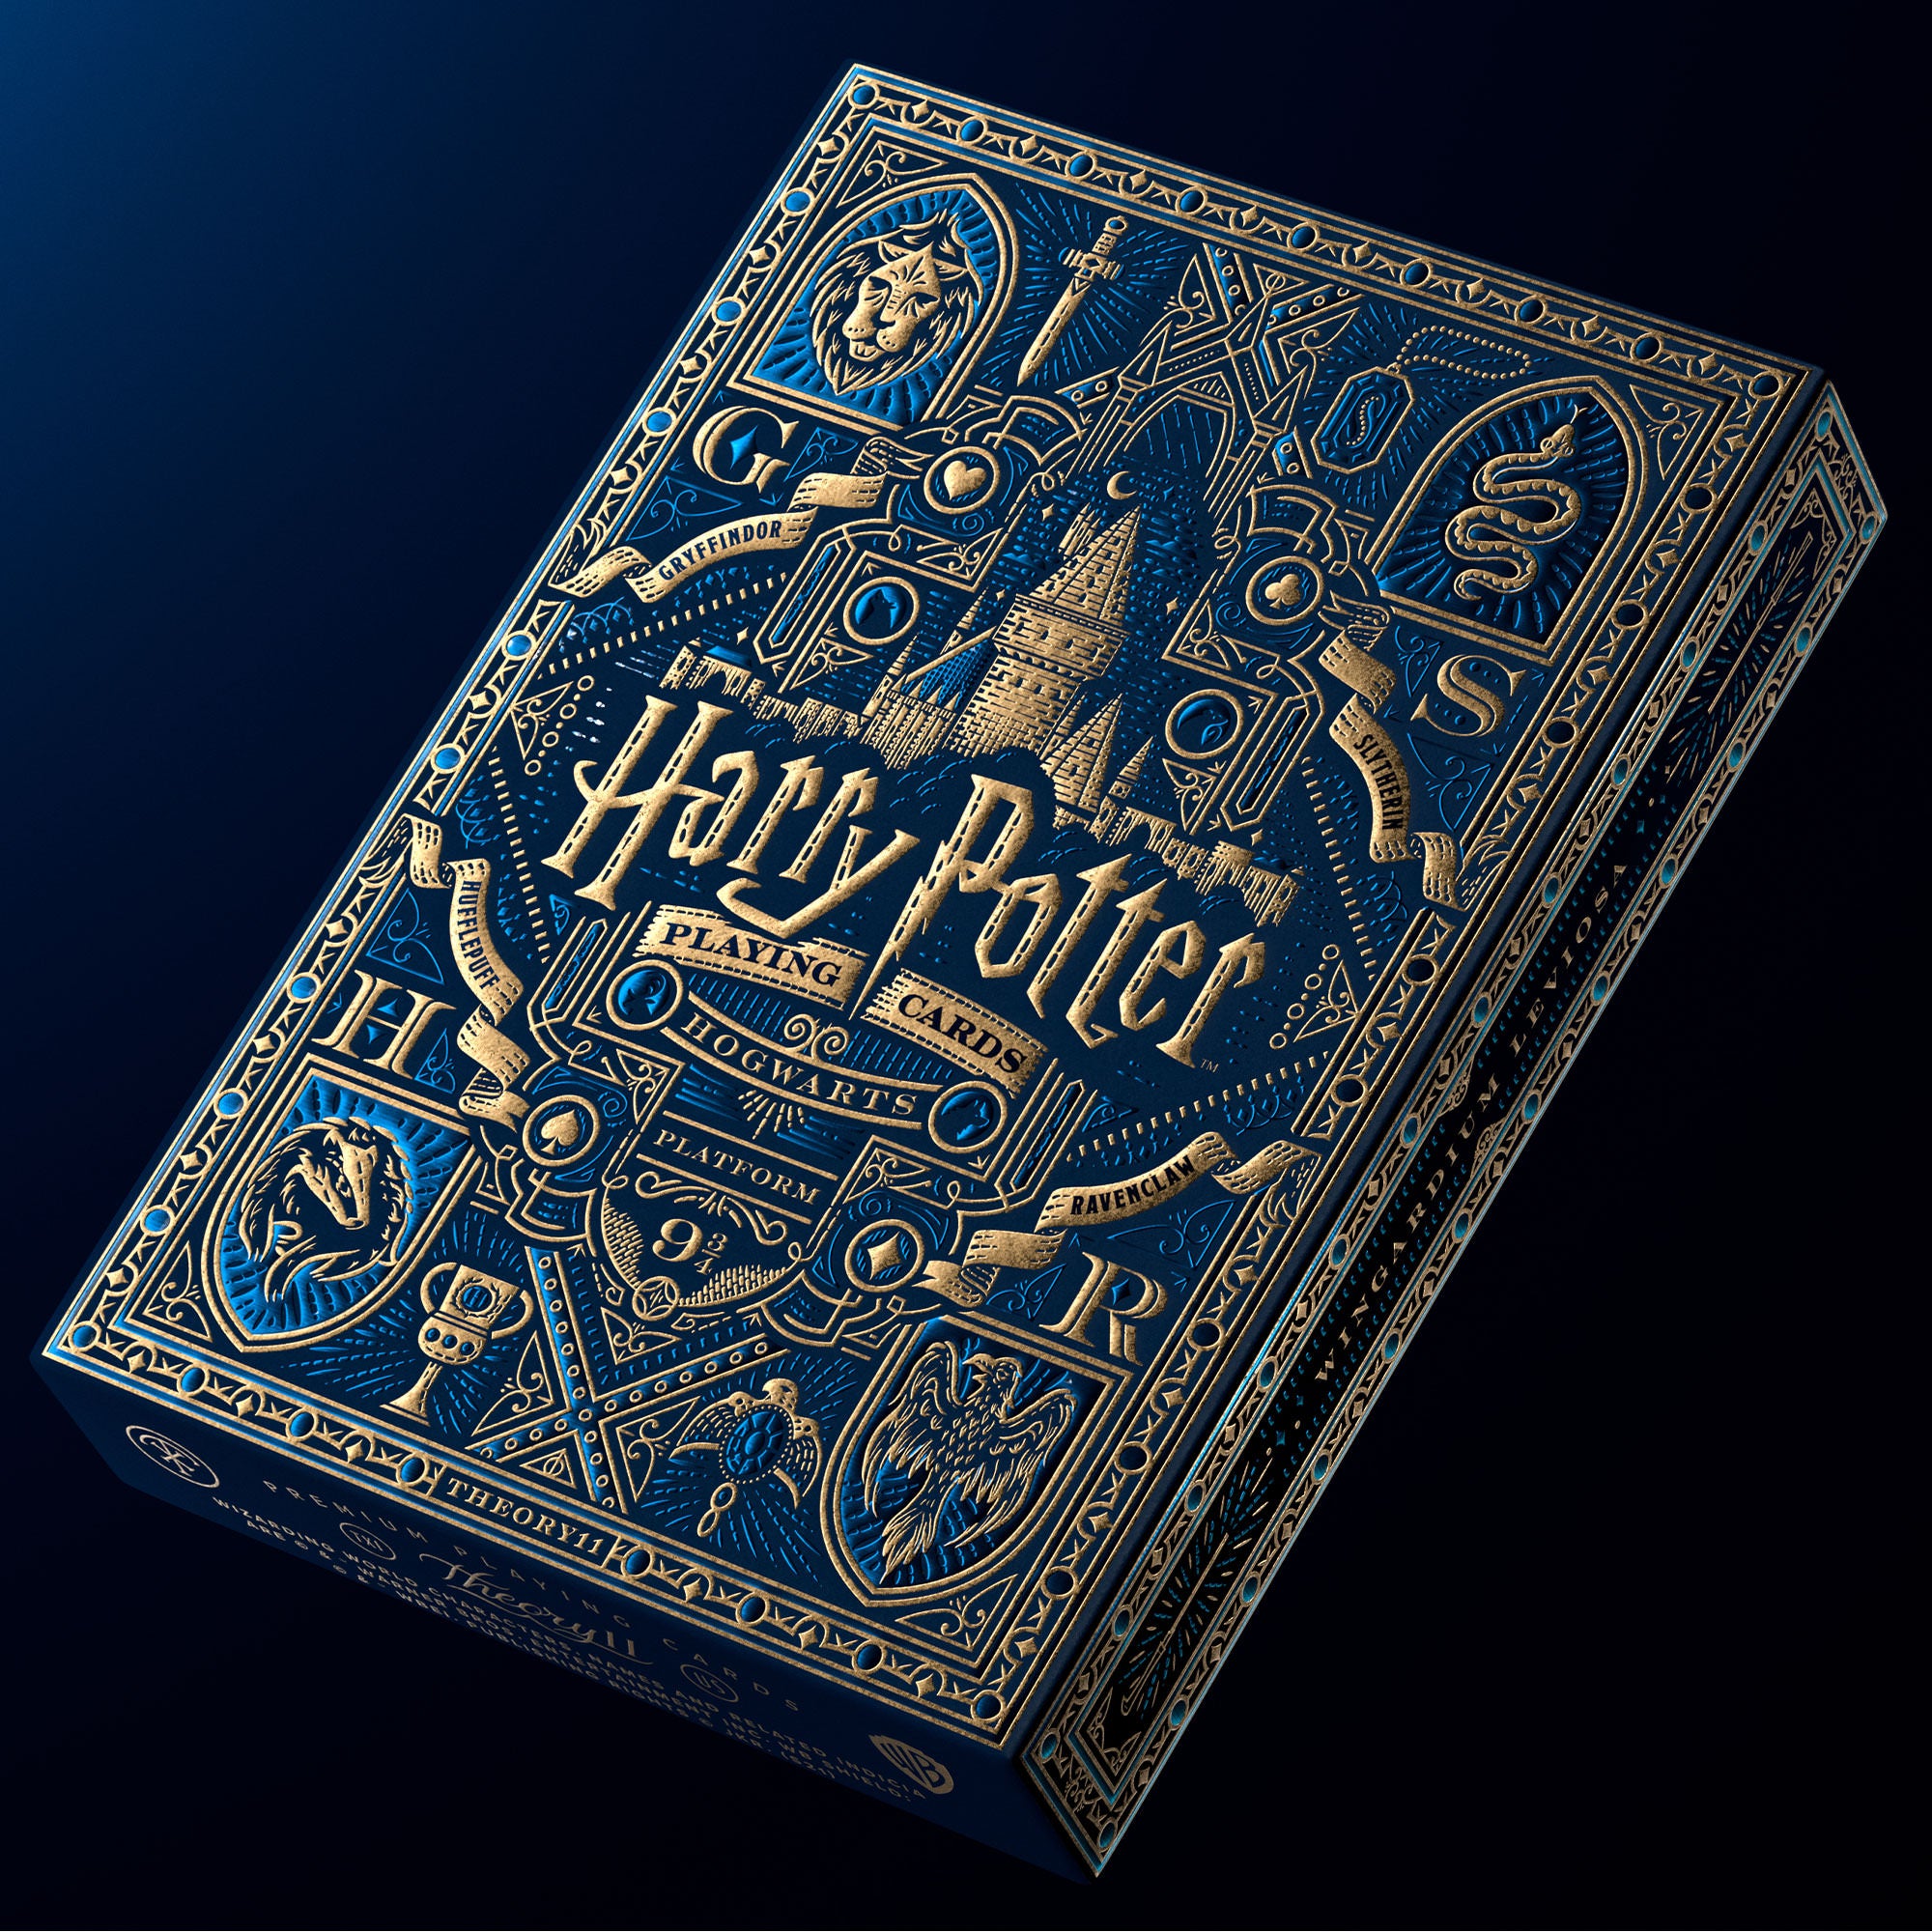 5 REAL Harry Potter Gadgets! ✨ 